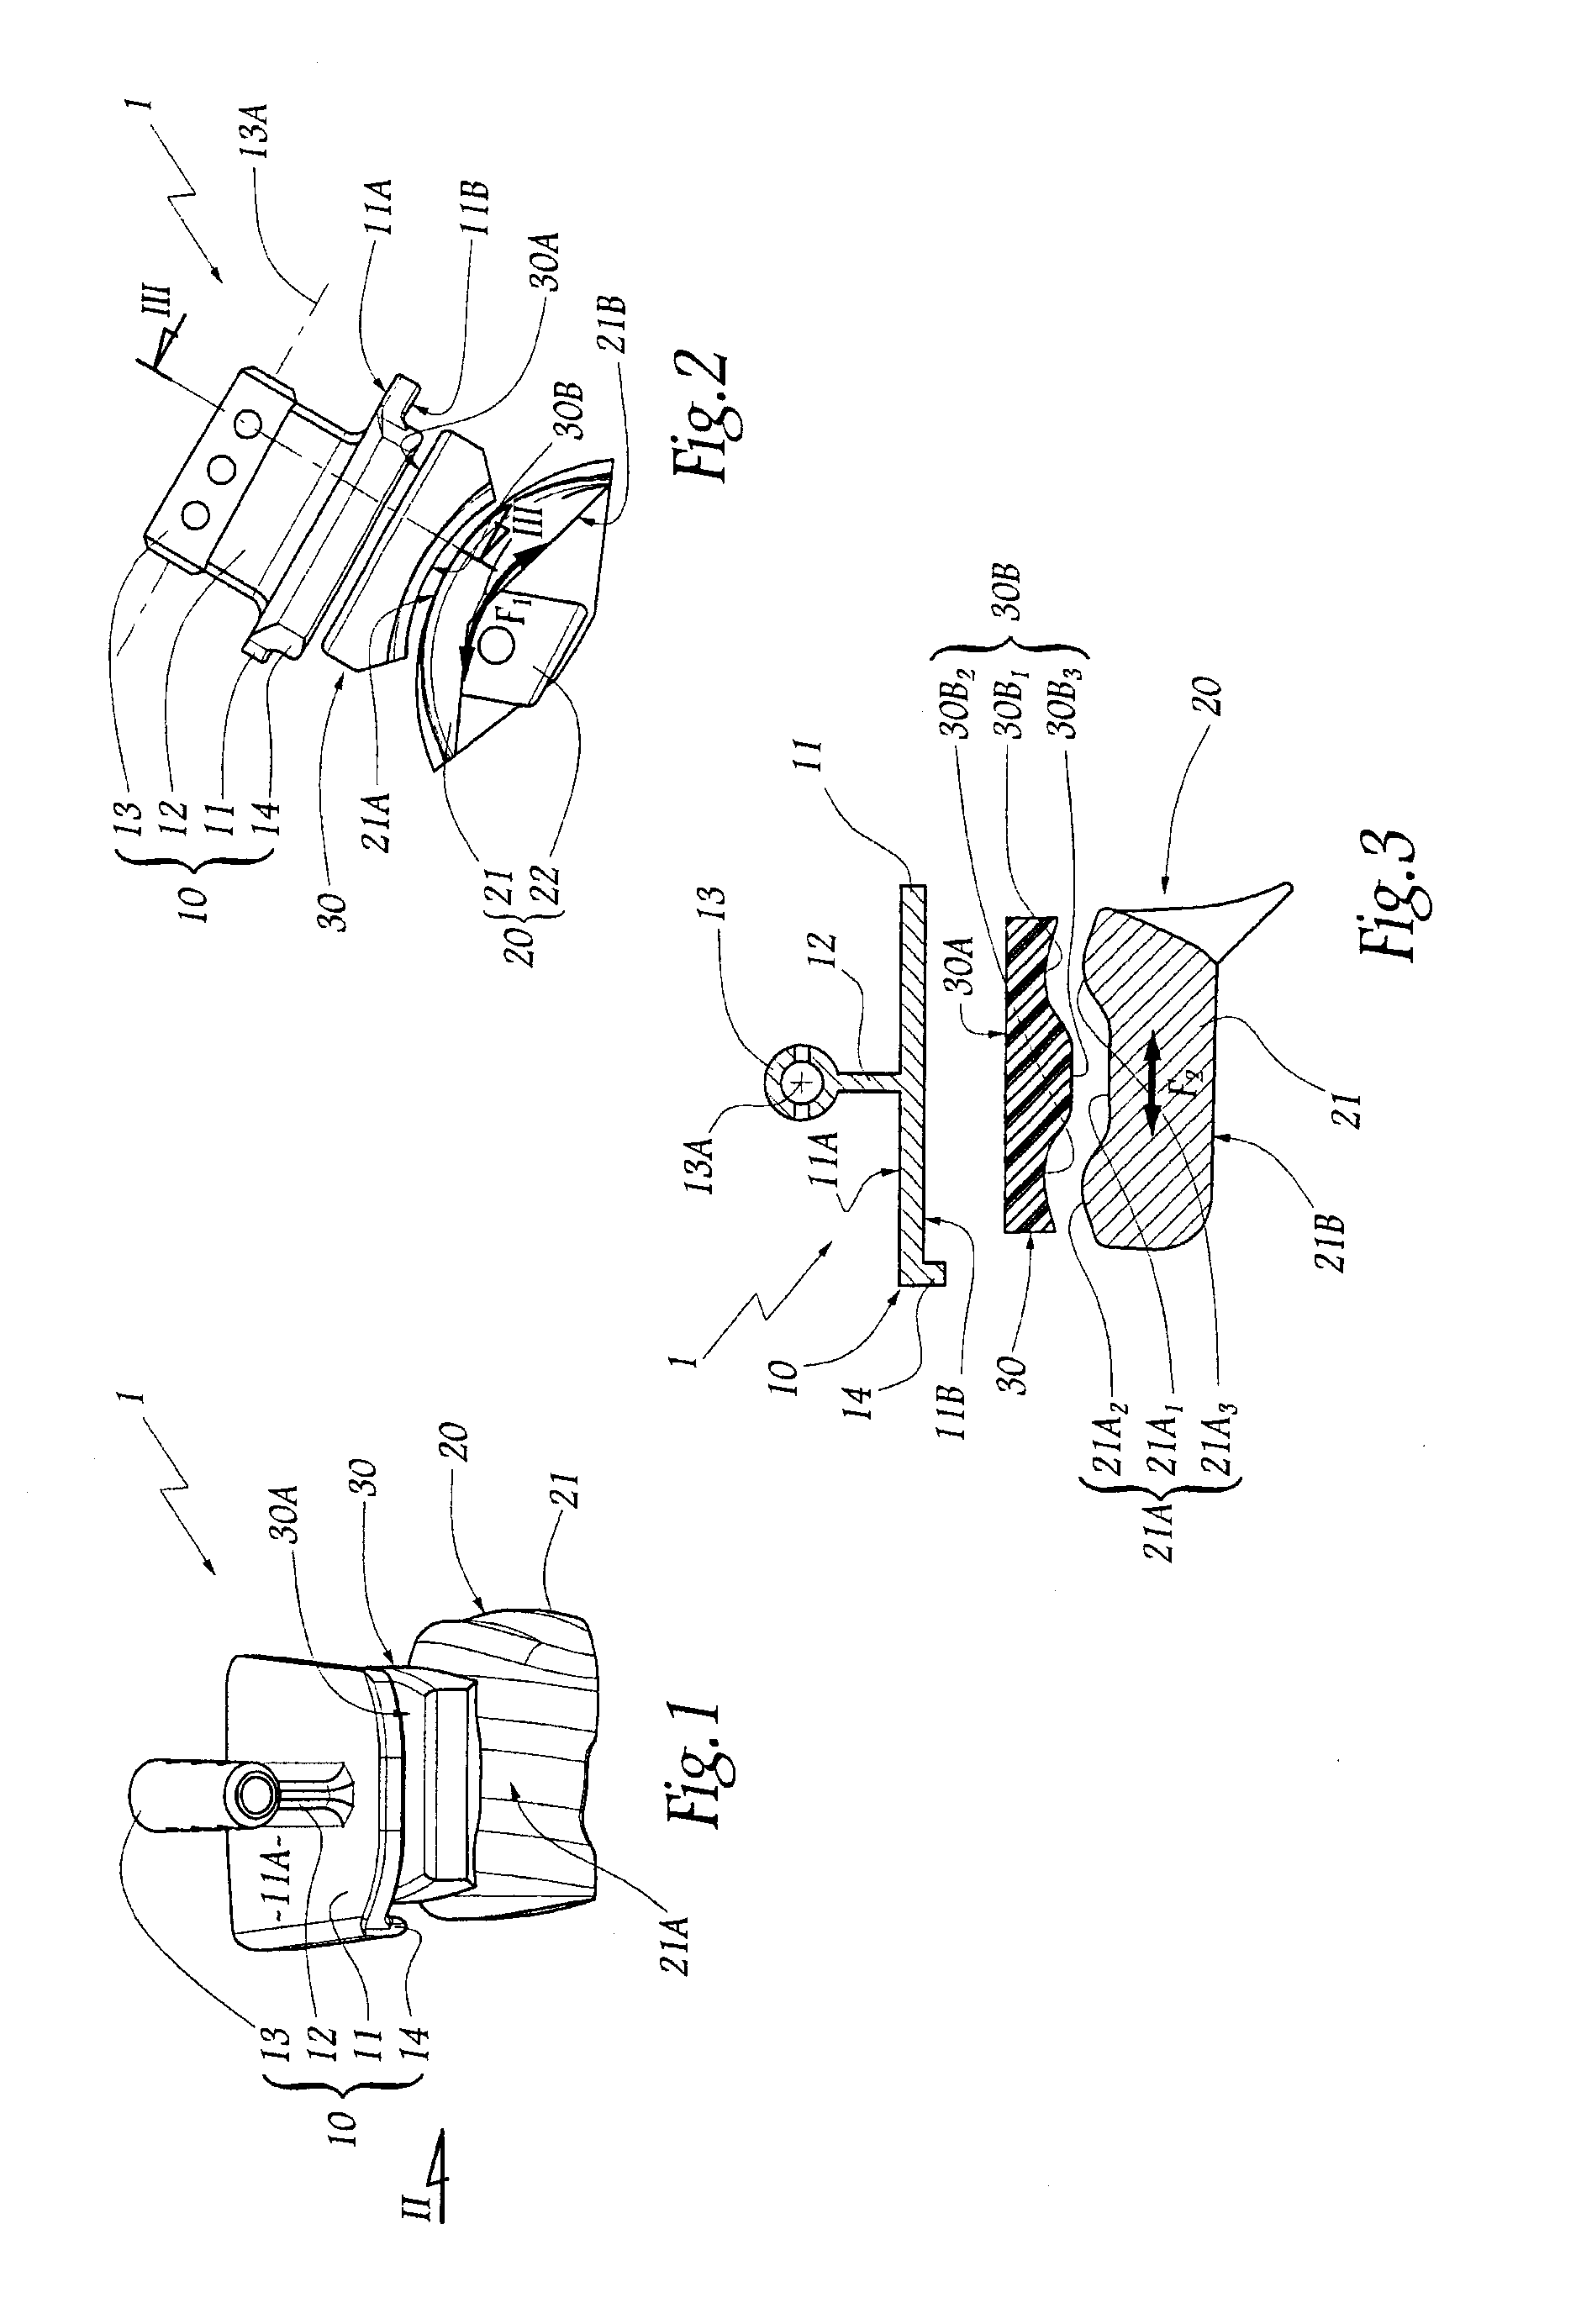 Surgical instrumentation kit for inserting an ankle prosthesis